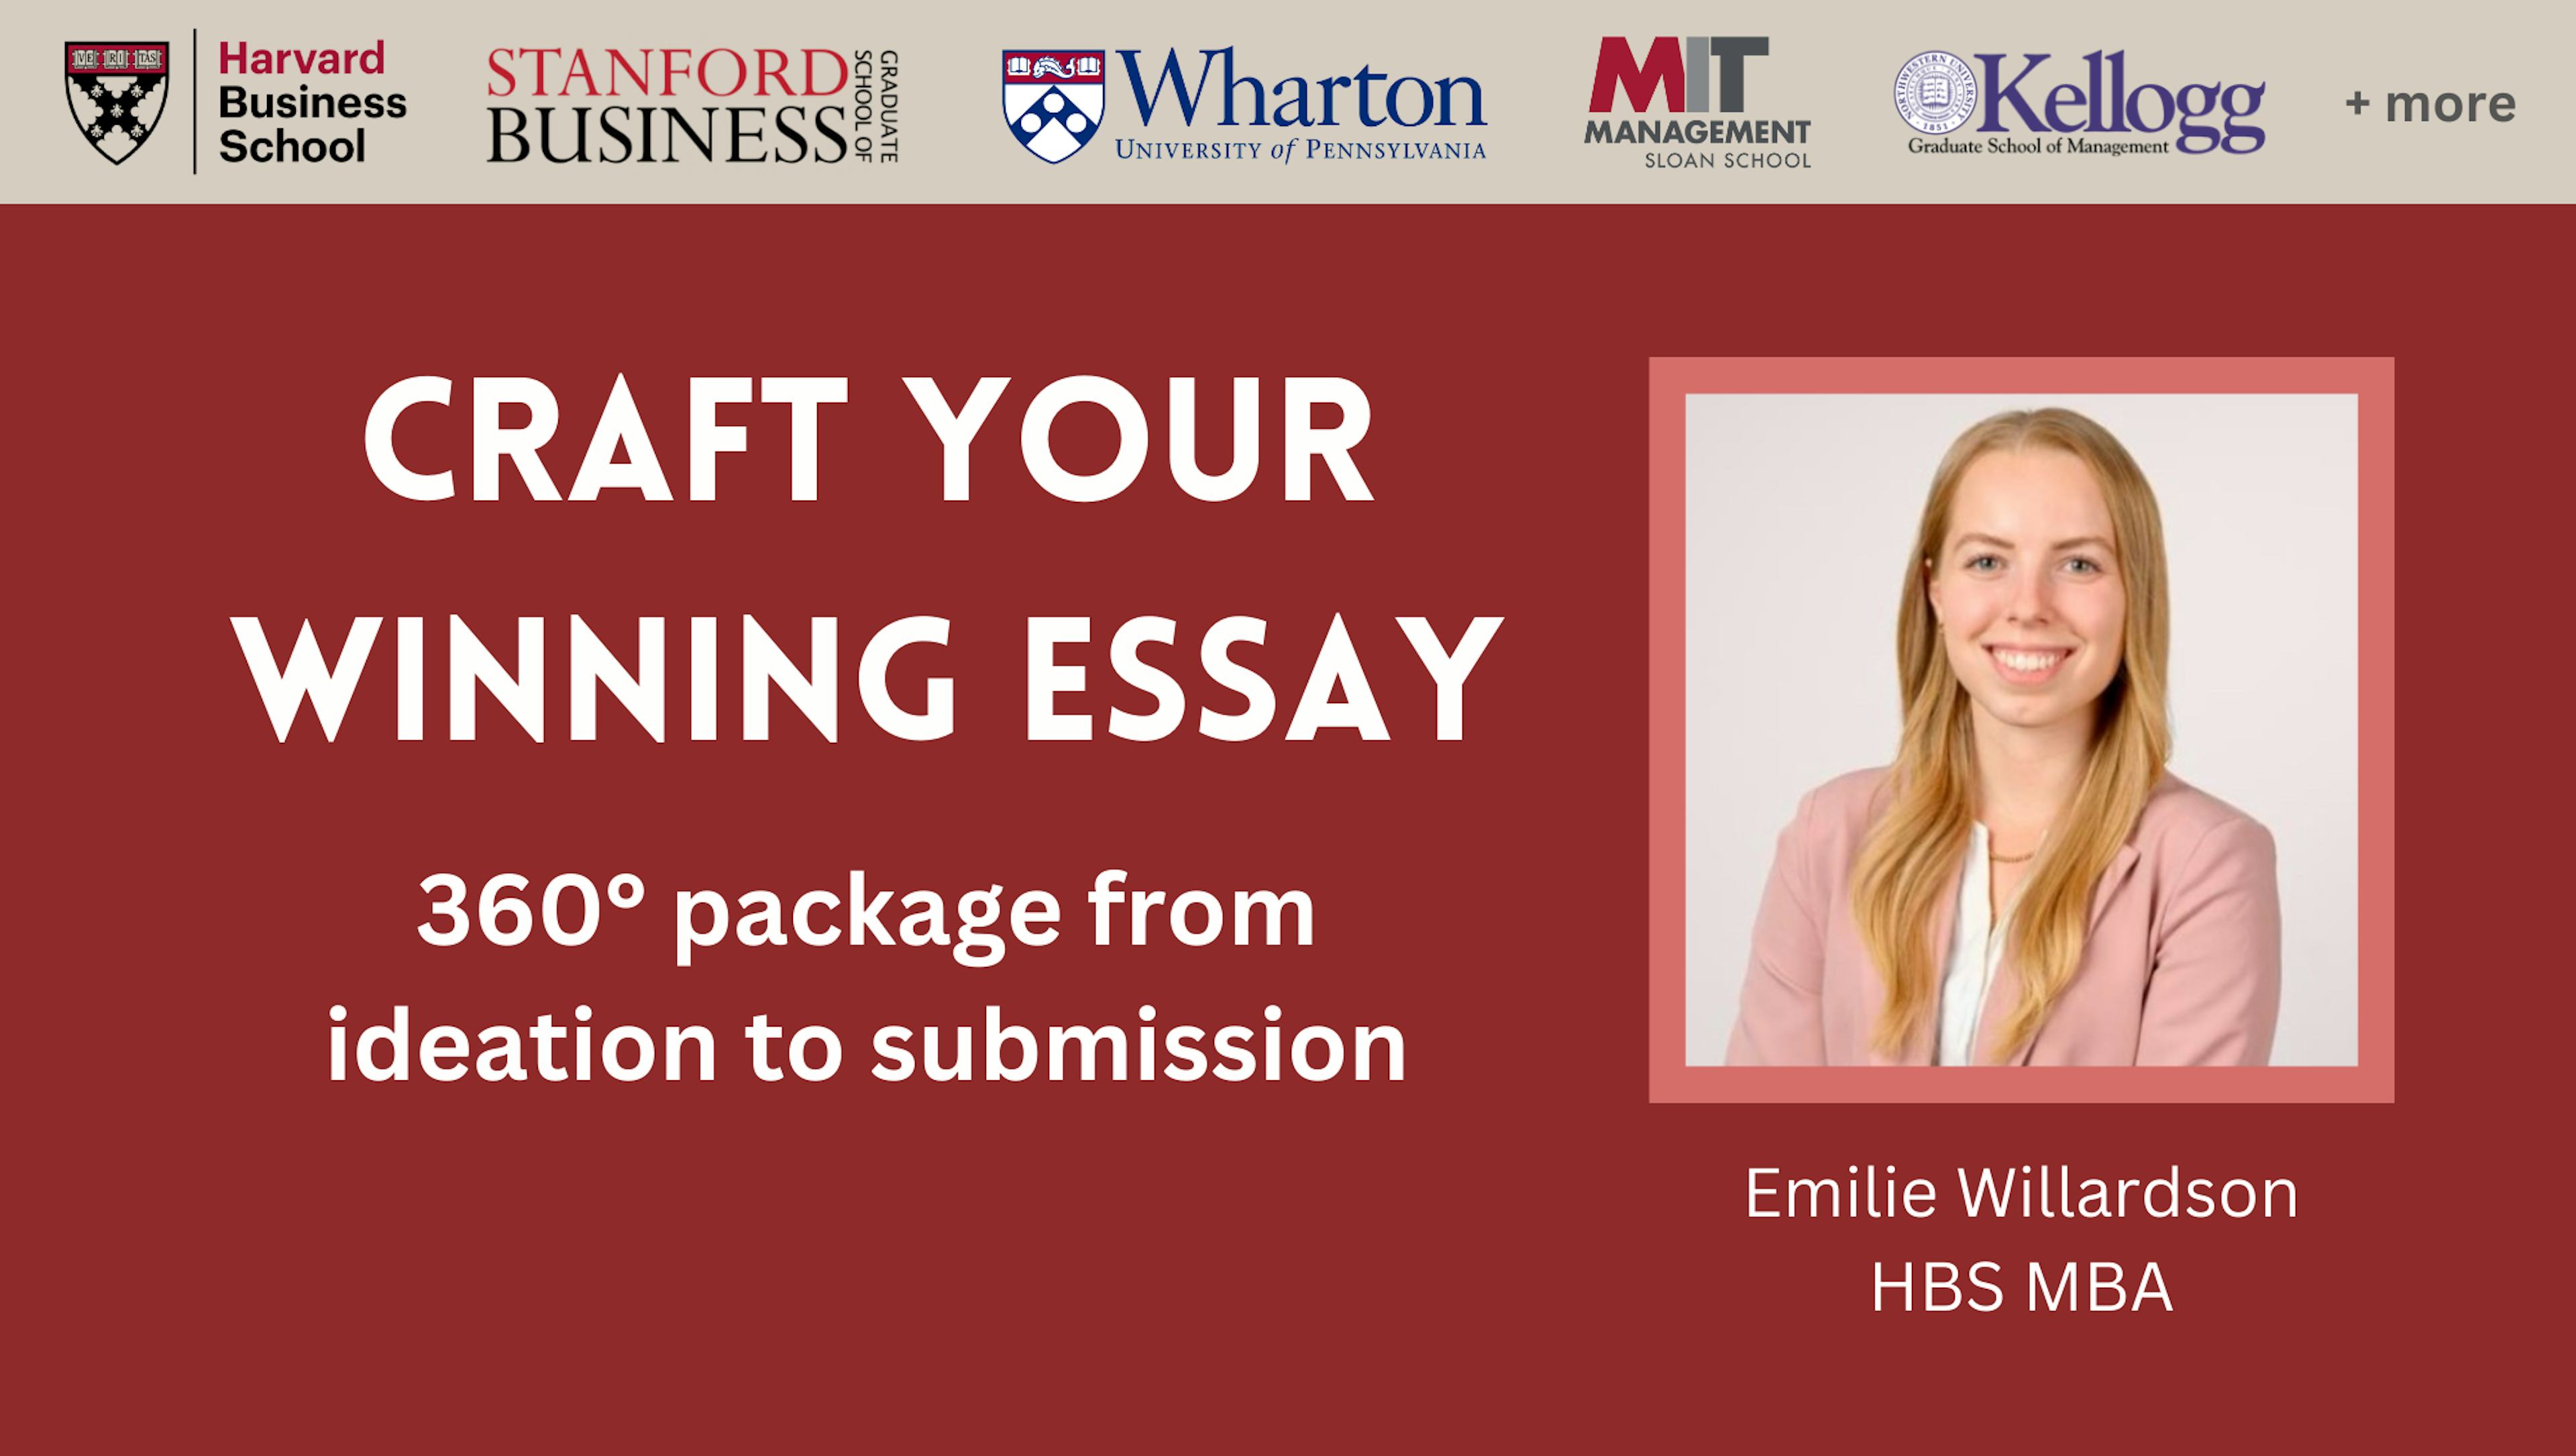 Craft your winning essay - 360° package from ideation to submission